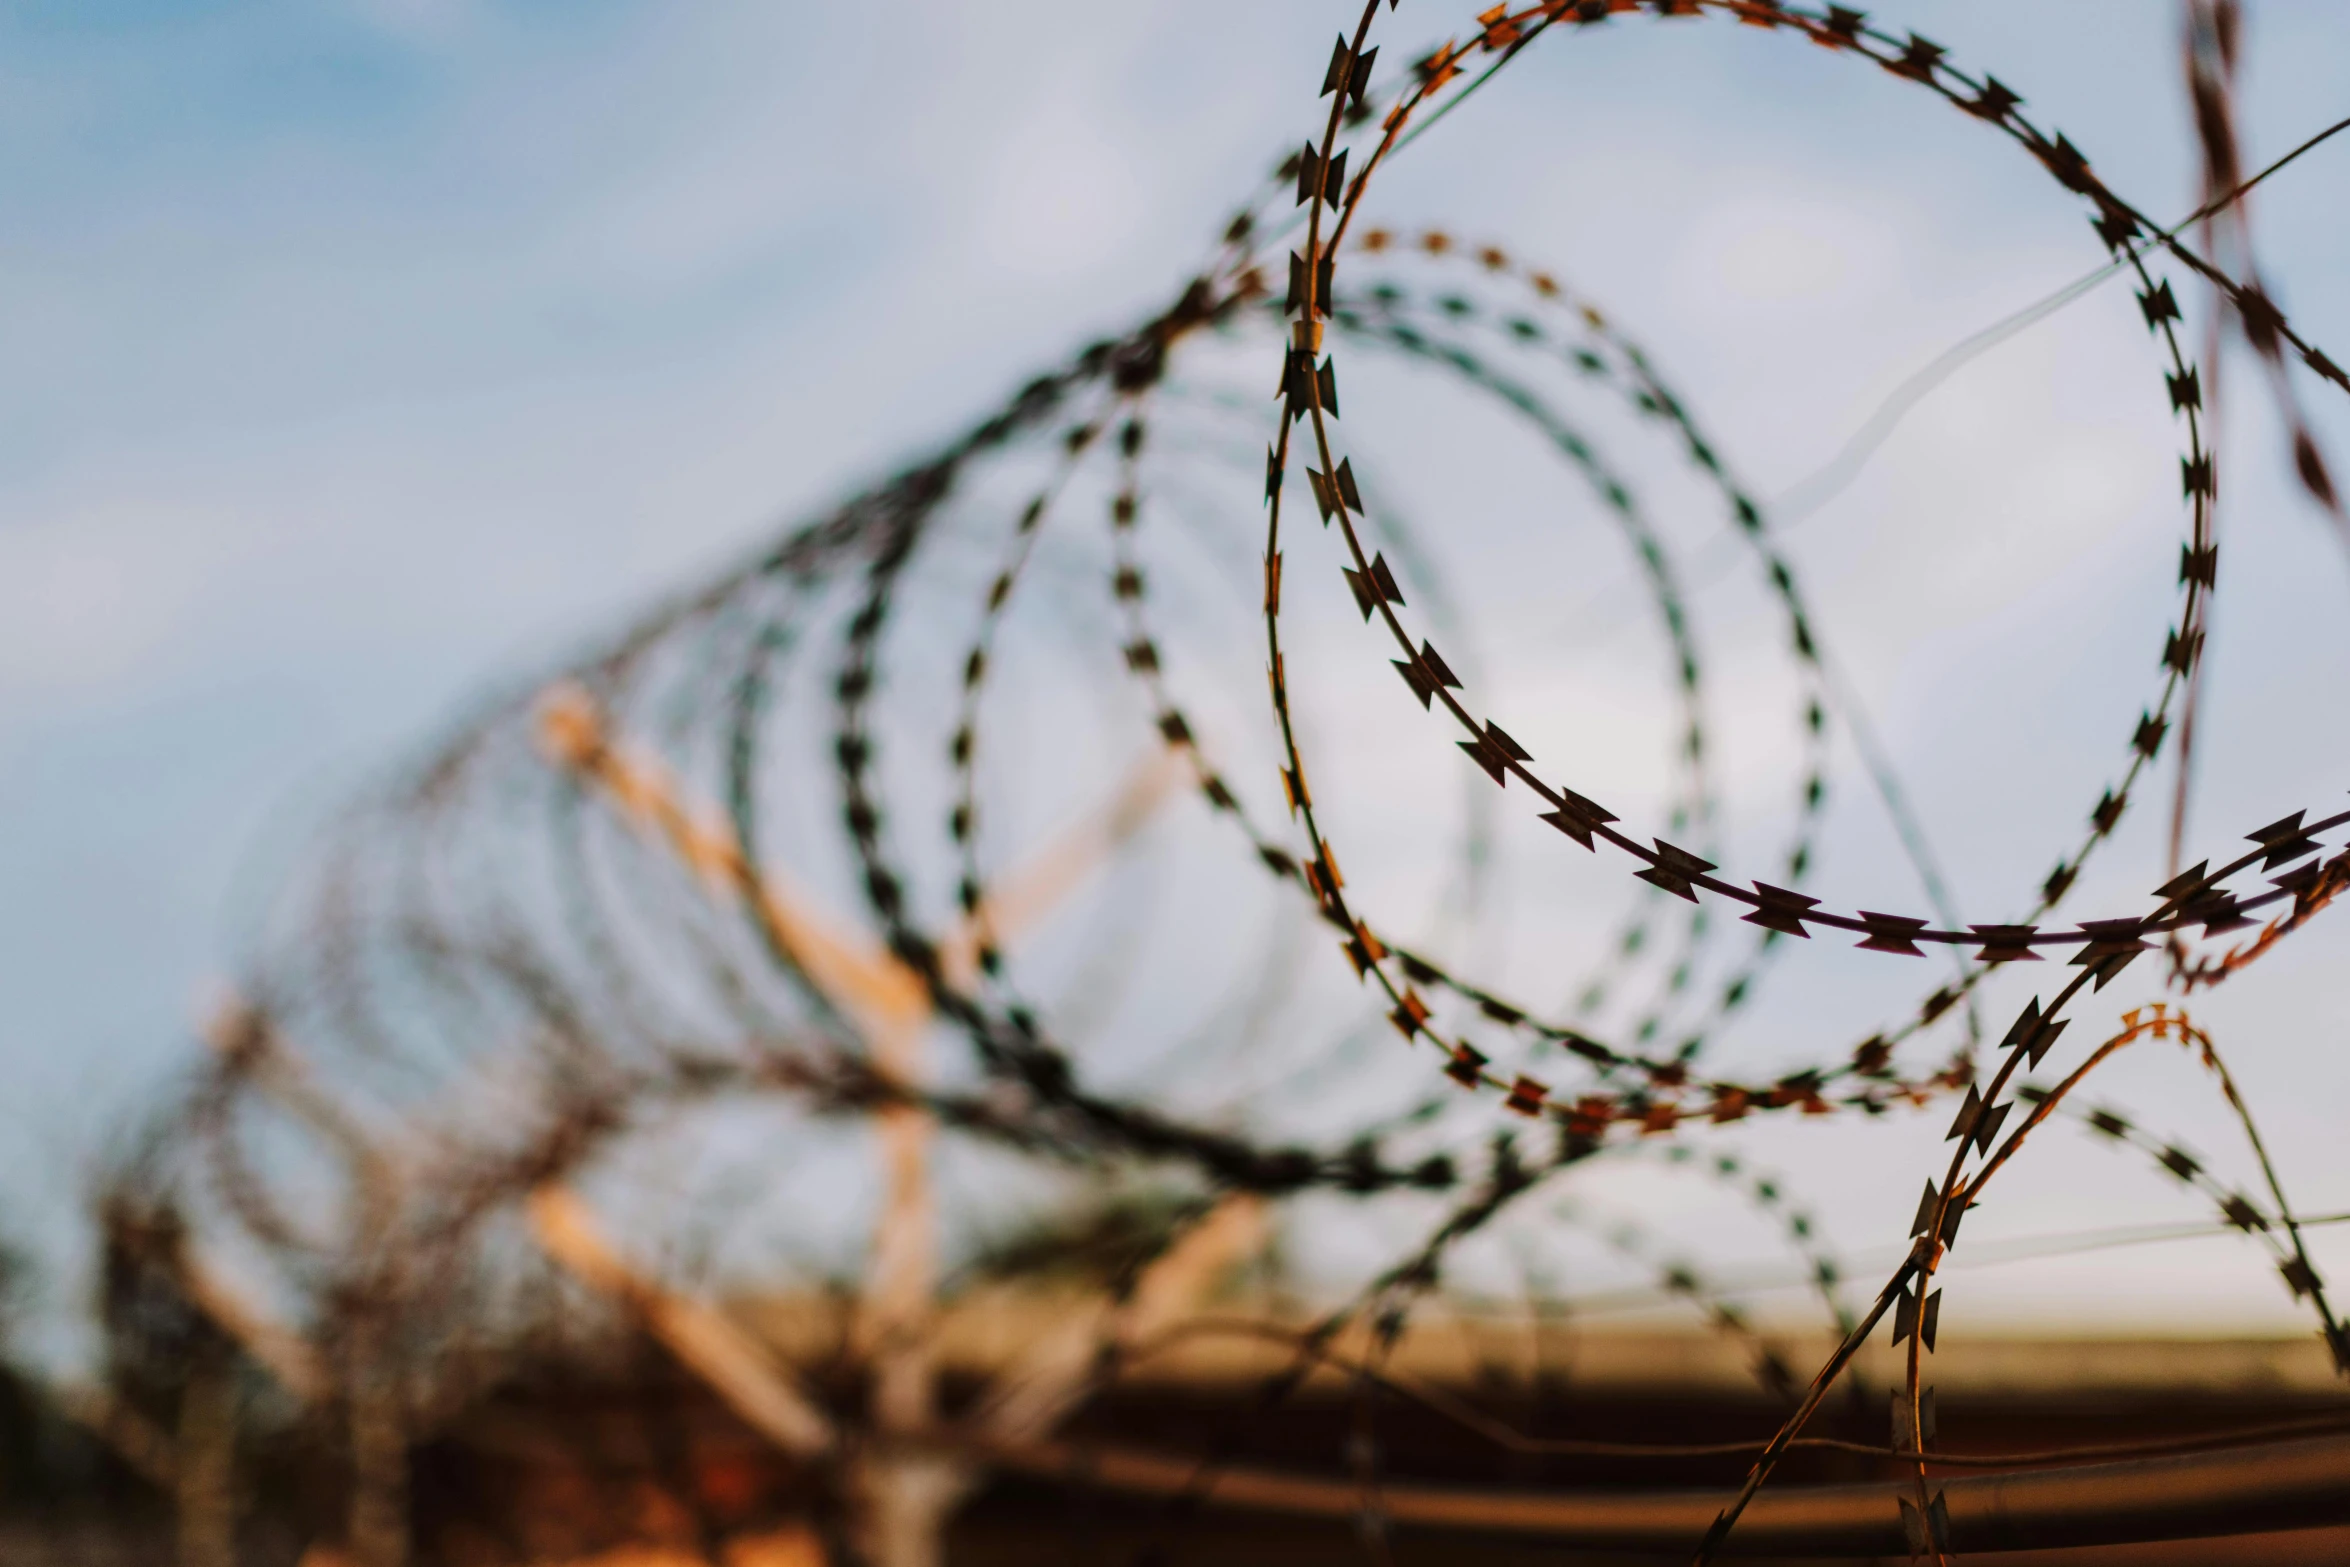 a close up image of barbed wire against a clear sky